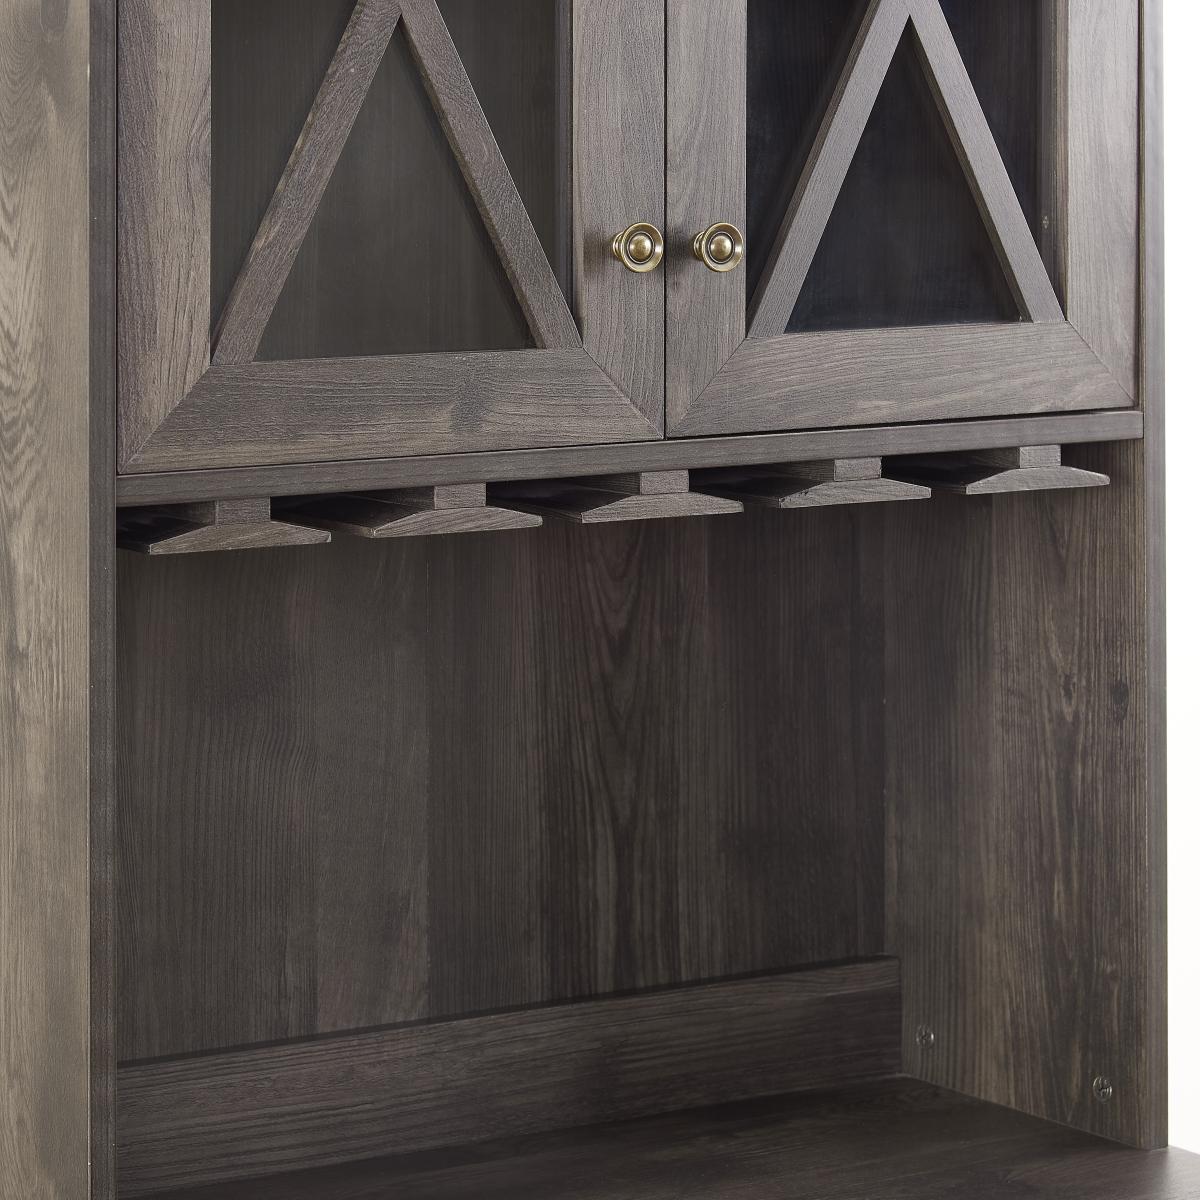 Farmhouse Bar Cabinet for Liquor and Glasses, Dining Room Kitchen Cabinet with Wine Rack, Sideboards Buffets Bar Cabinet L26.89''*w15.87''*h67.3'' Charcoal Grey